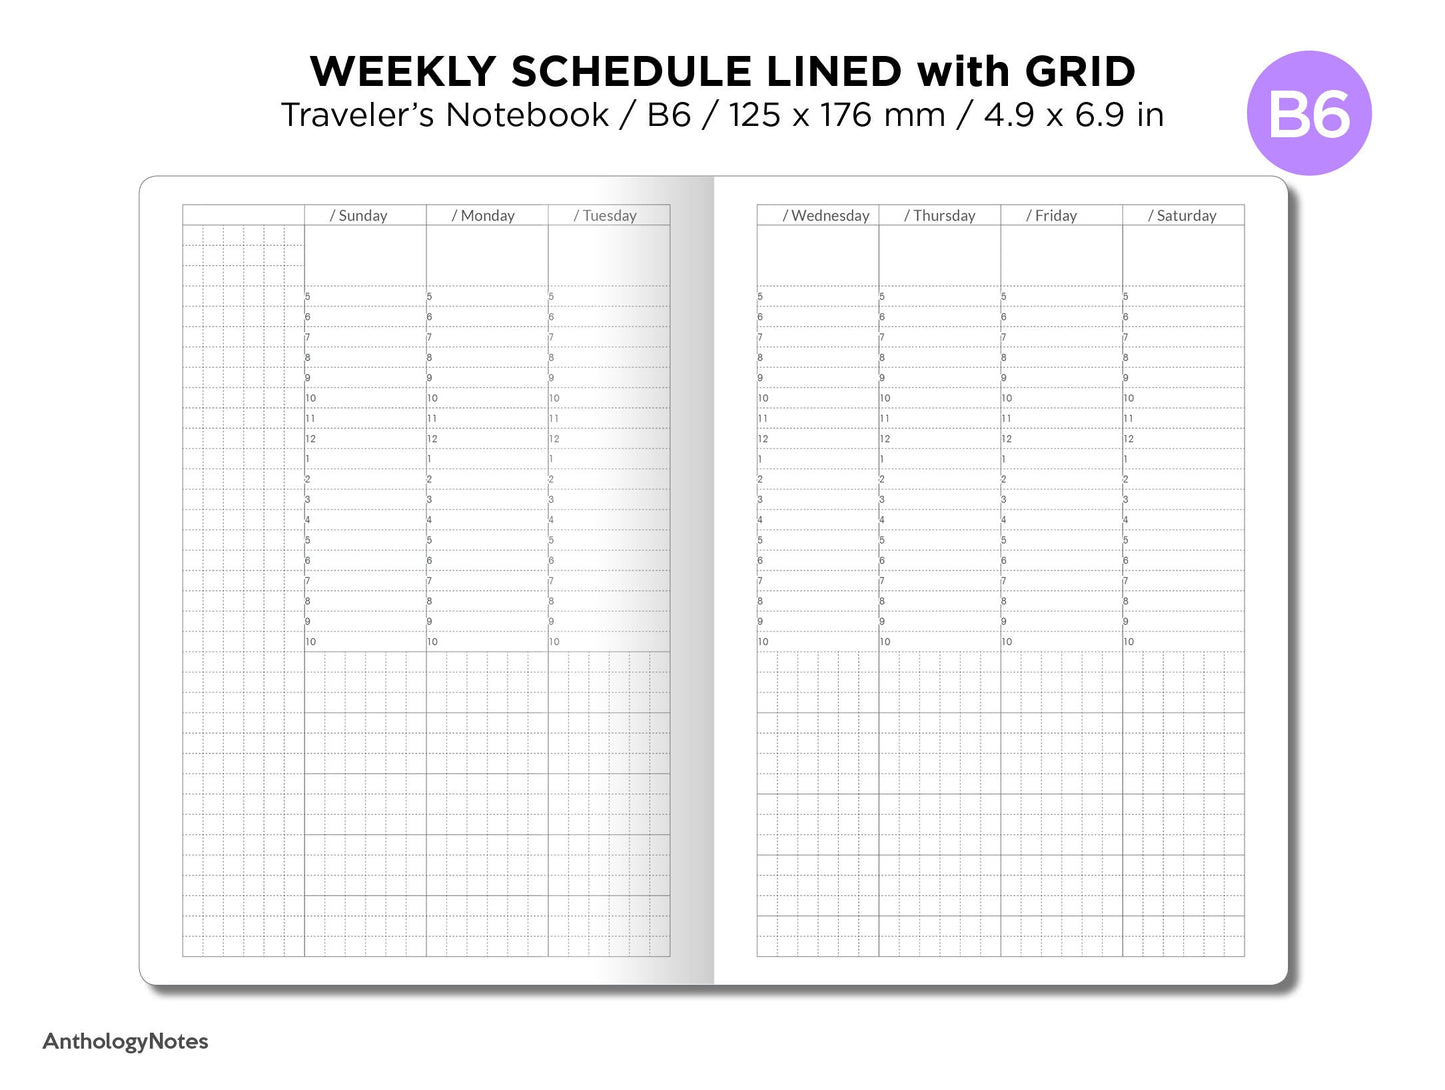 B6 Weekly Schedule Lined With GRID Printable Traveler's Notebook Insert Minimalist Functional